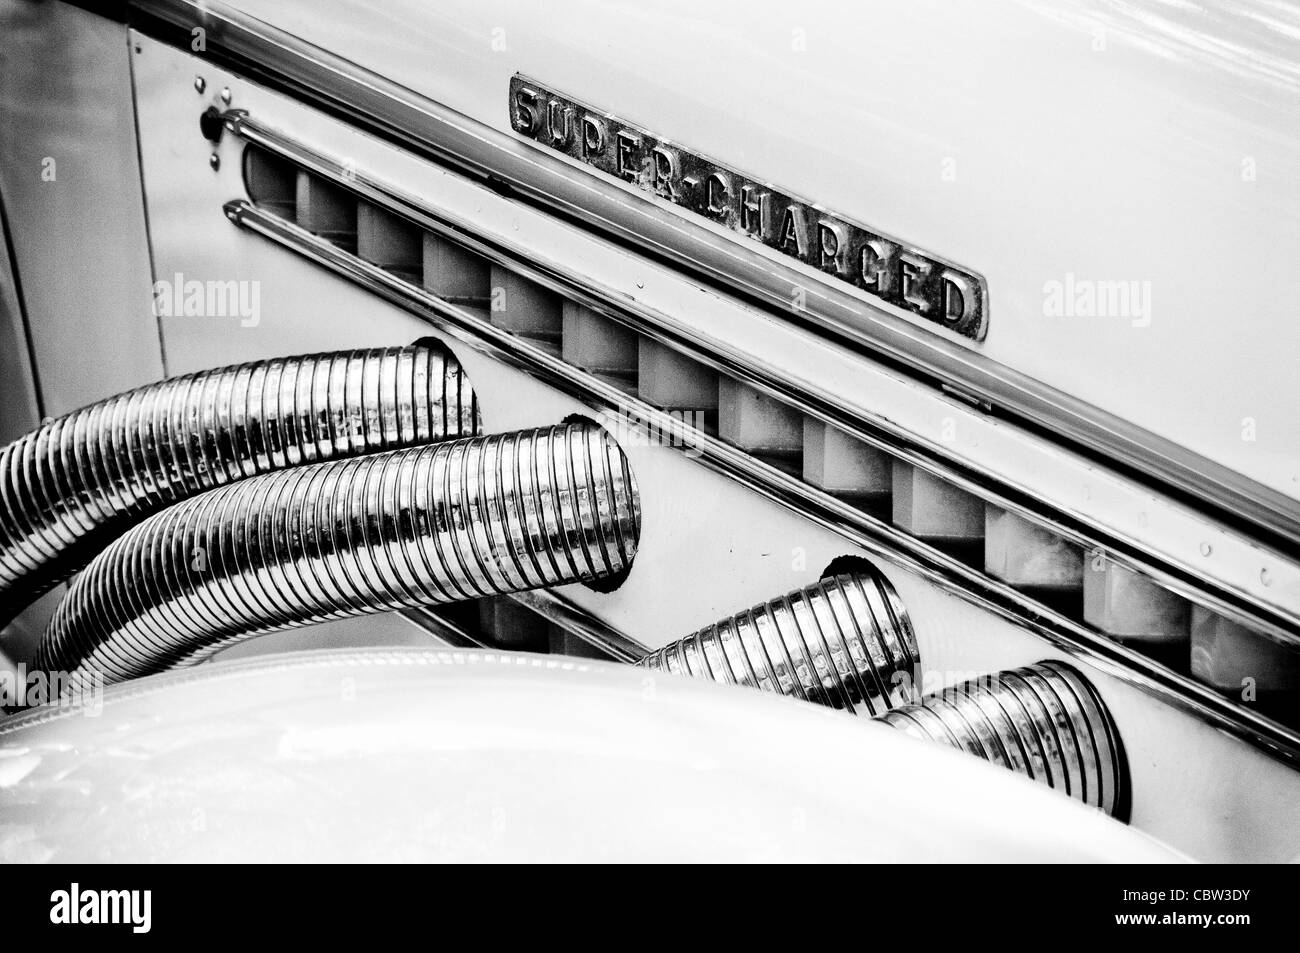 Exhaust pipes Auburn 851 Supercharged speedster Stock Photo